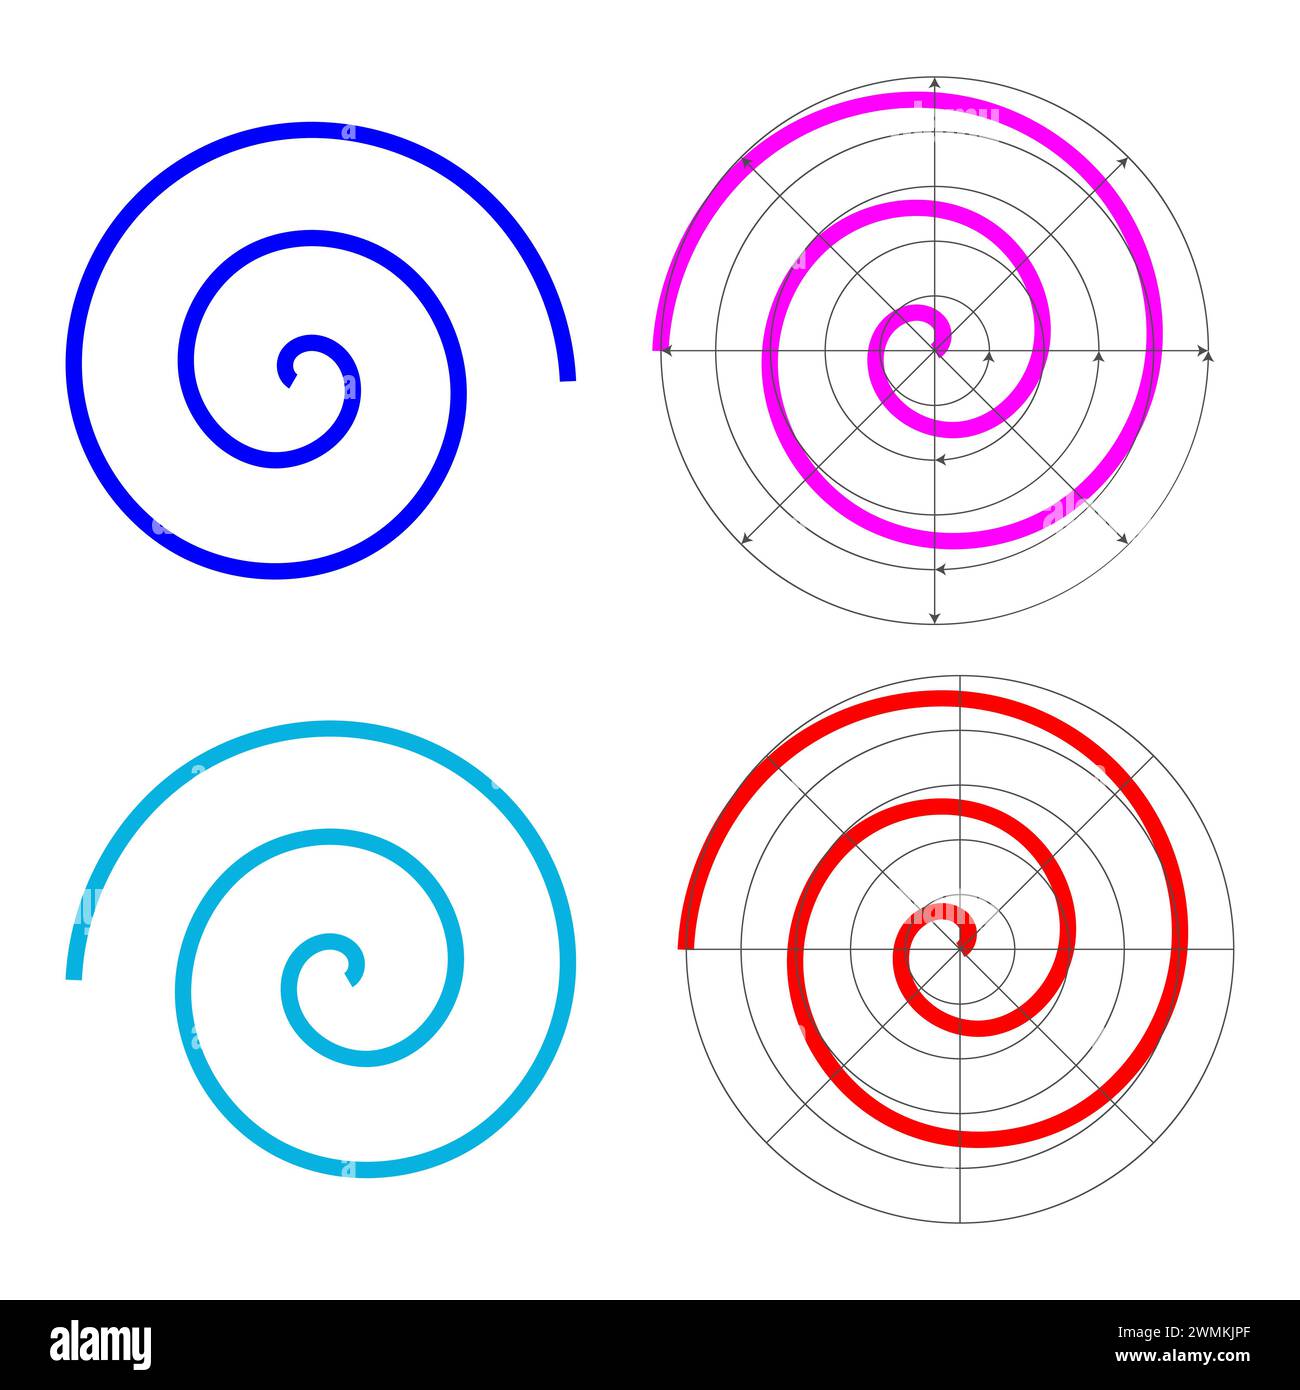 Archimedean arithmetic spiral, rotating with constant angular velocity on a polar graph. Stock Vector